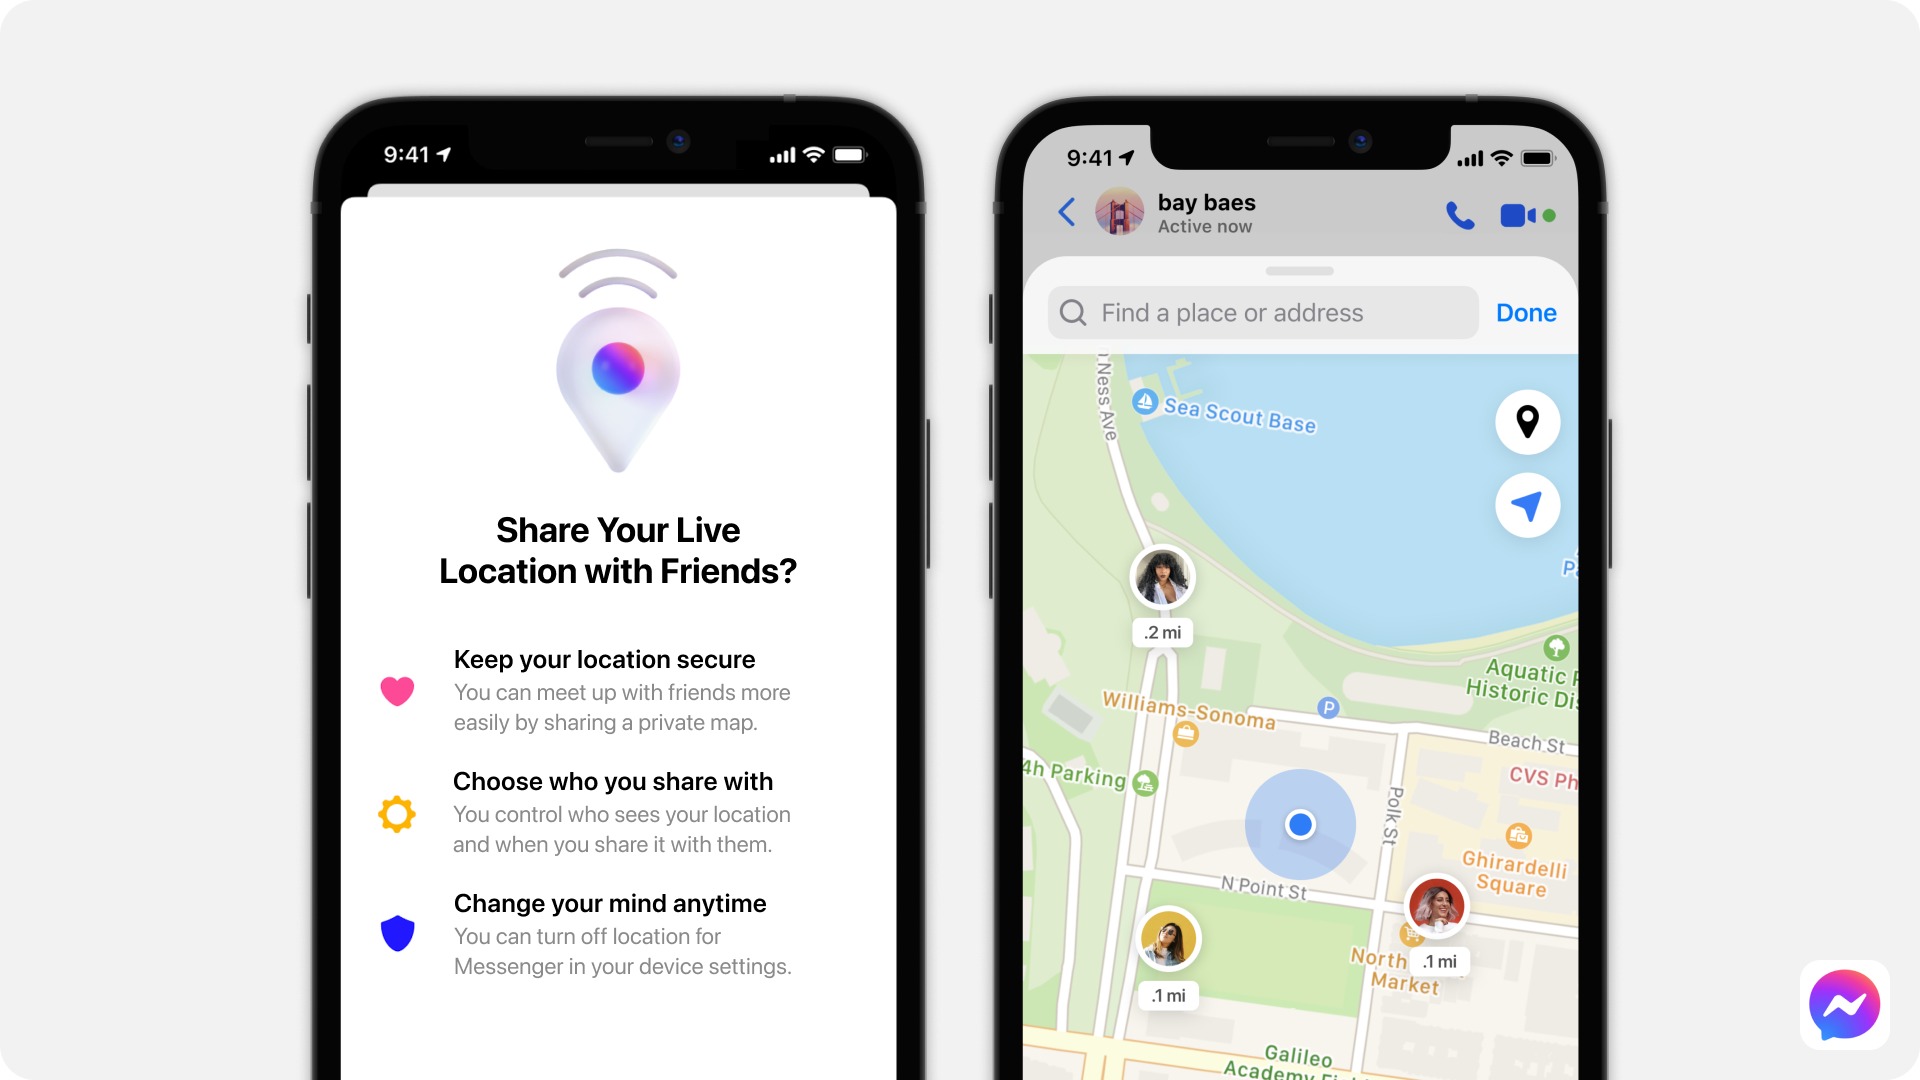 facebook-adds-live-location-sharing-to-messenger-app